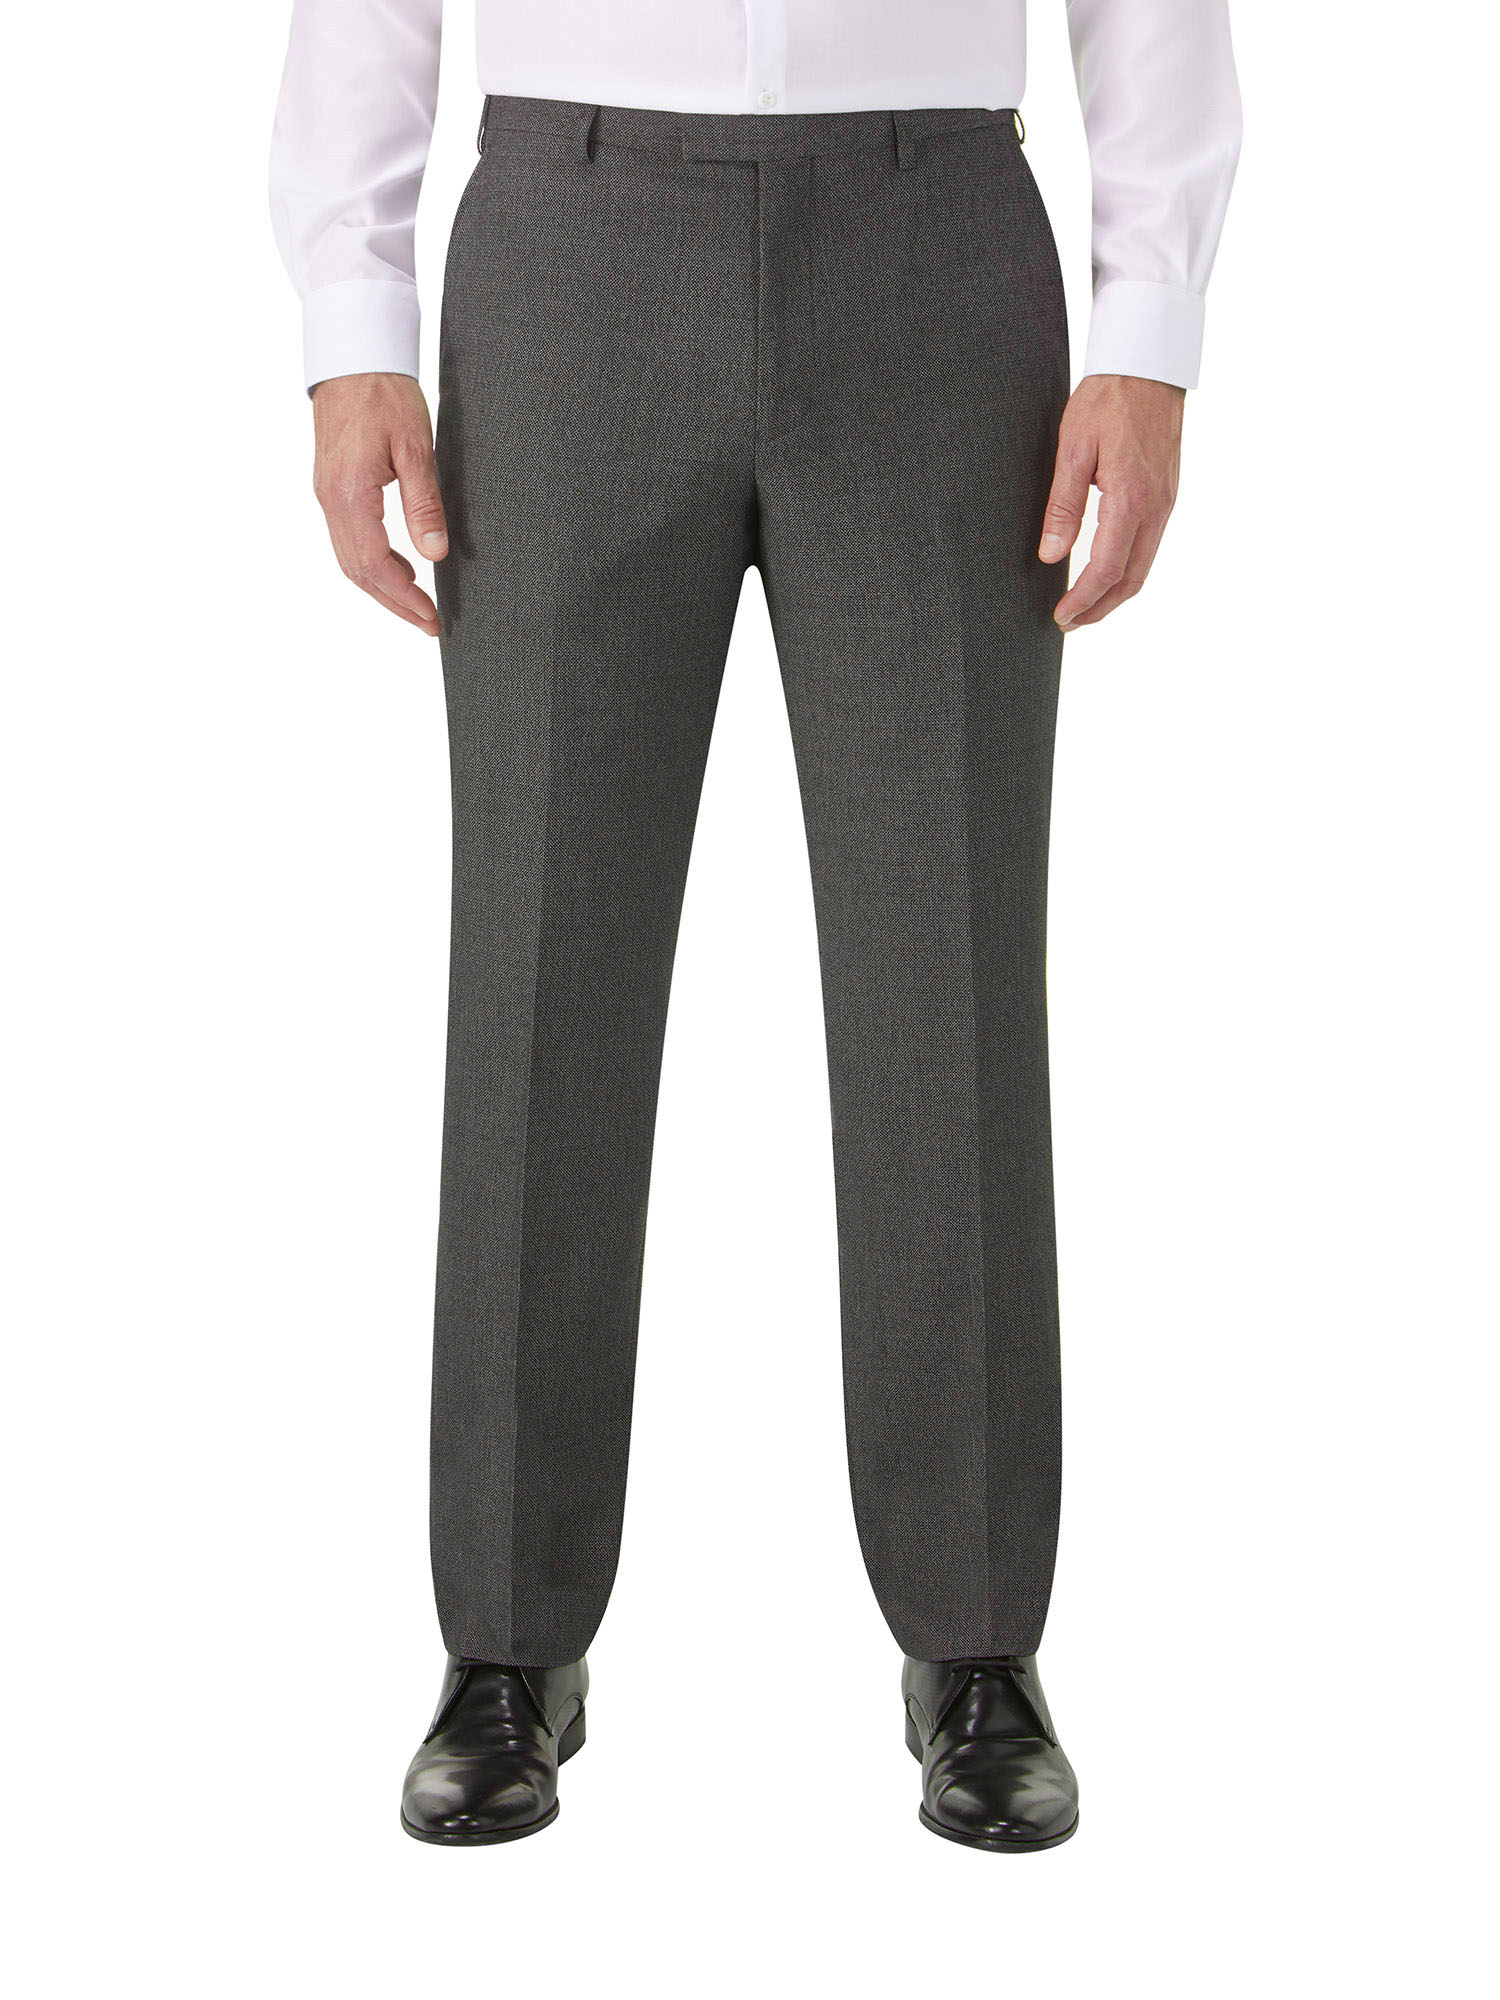 Harcourt Tailored Grey 3 Piece Suit - Tom Murphy's Formal and Menswear